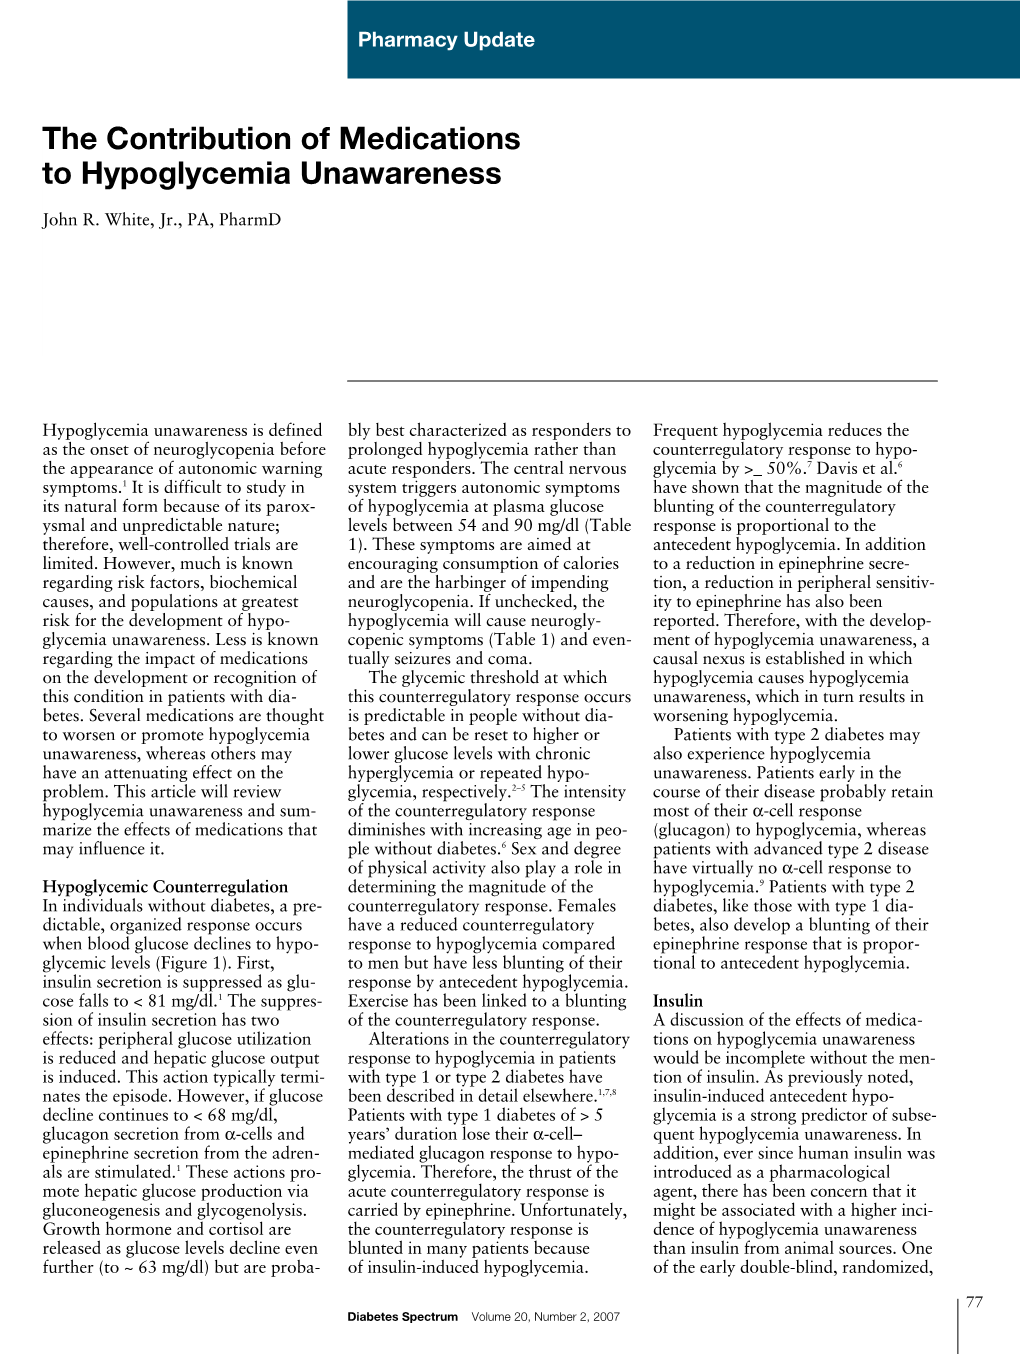 The Contribution of Medications to Hypoglycemia Unawareness